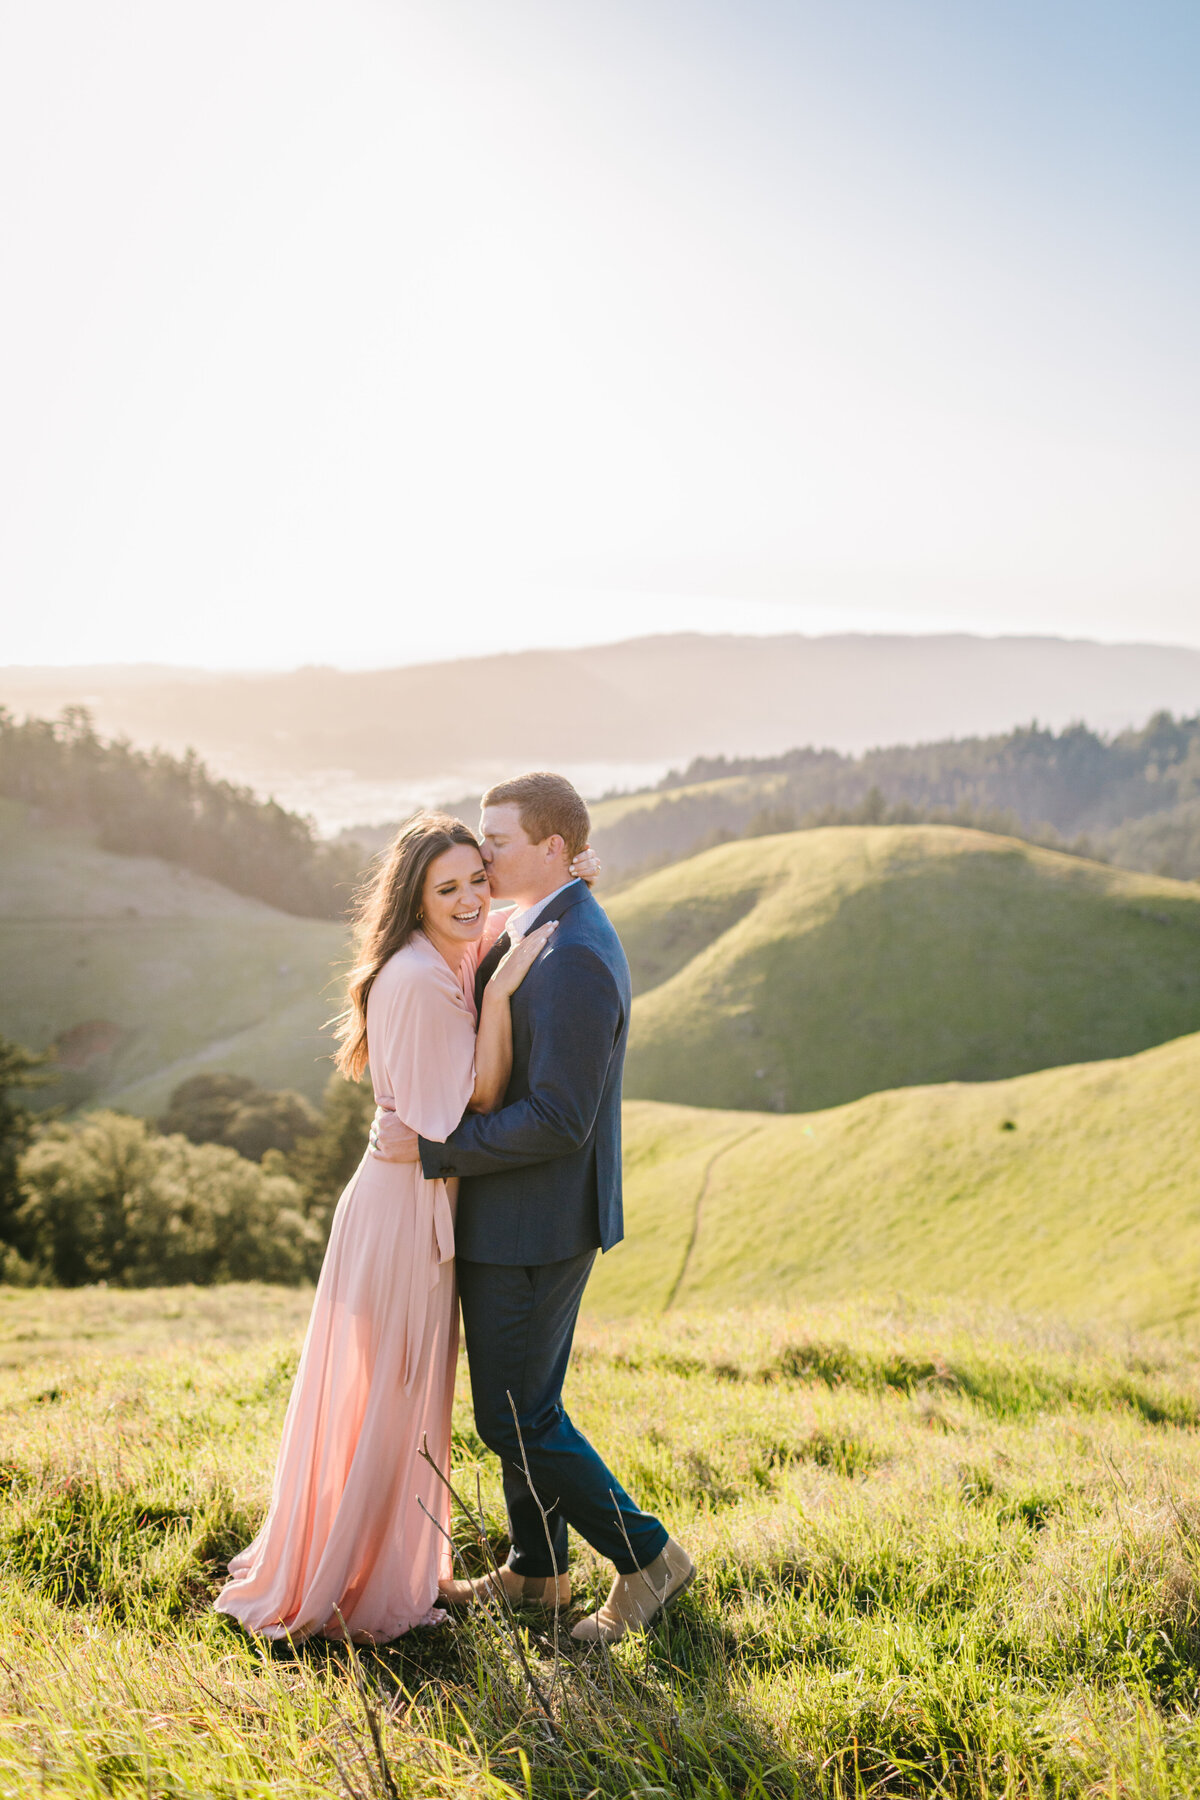 Best California and Texas Engagement Photographer-Jodee Debes Photography-196